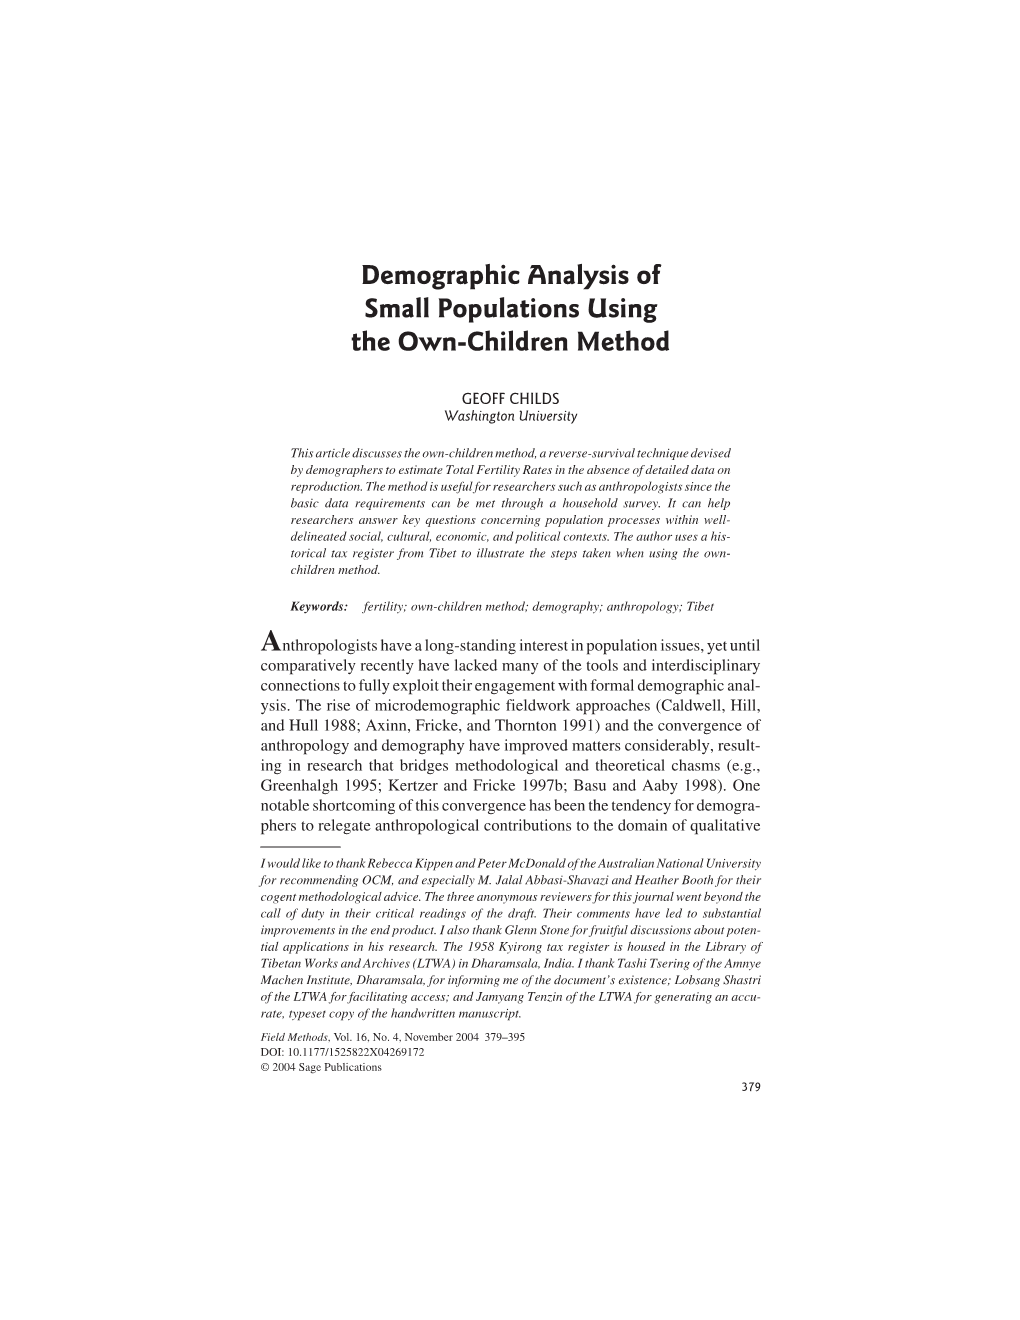 Demographic Analysis of Small Populations Using the Own-Children Method